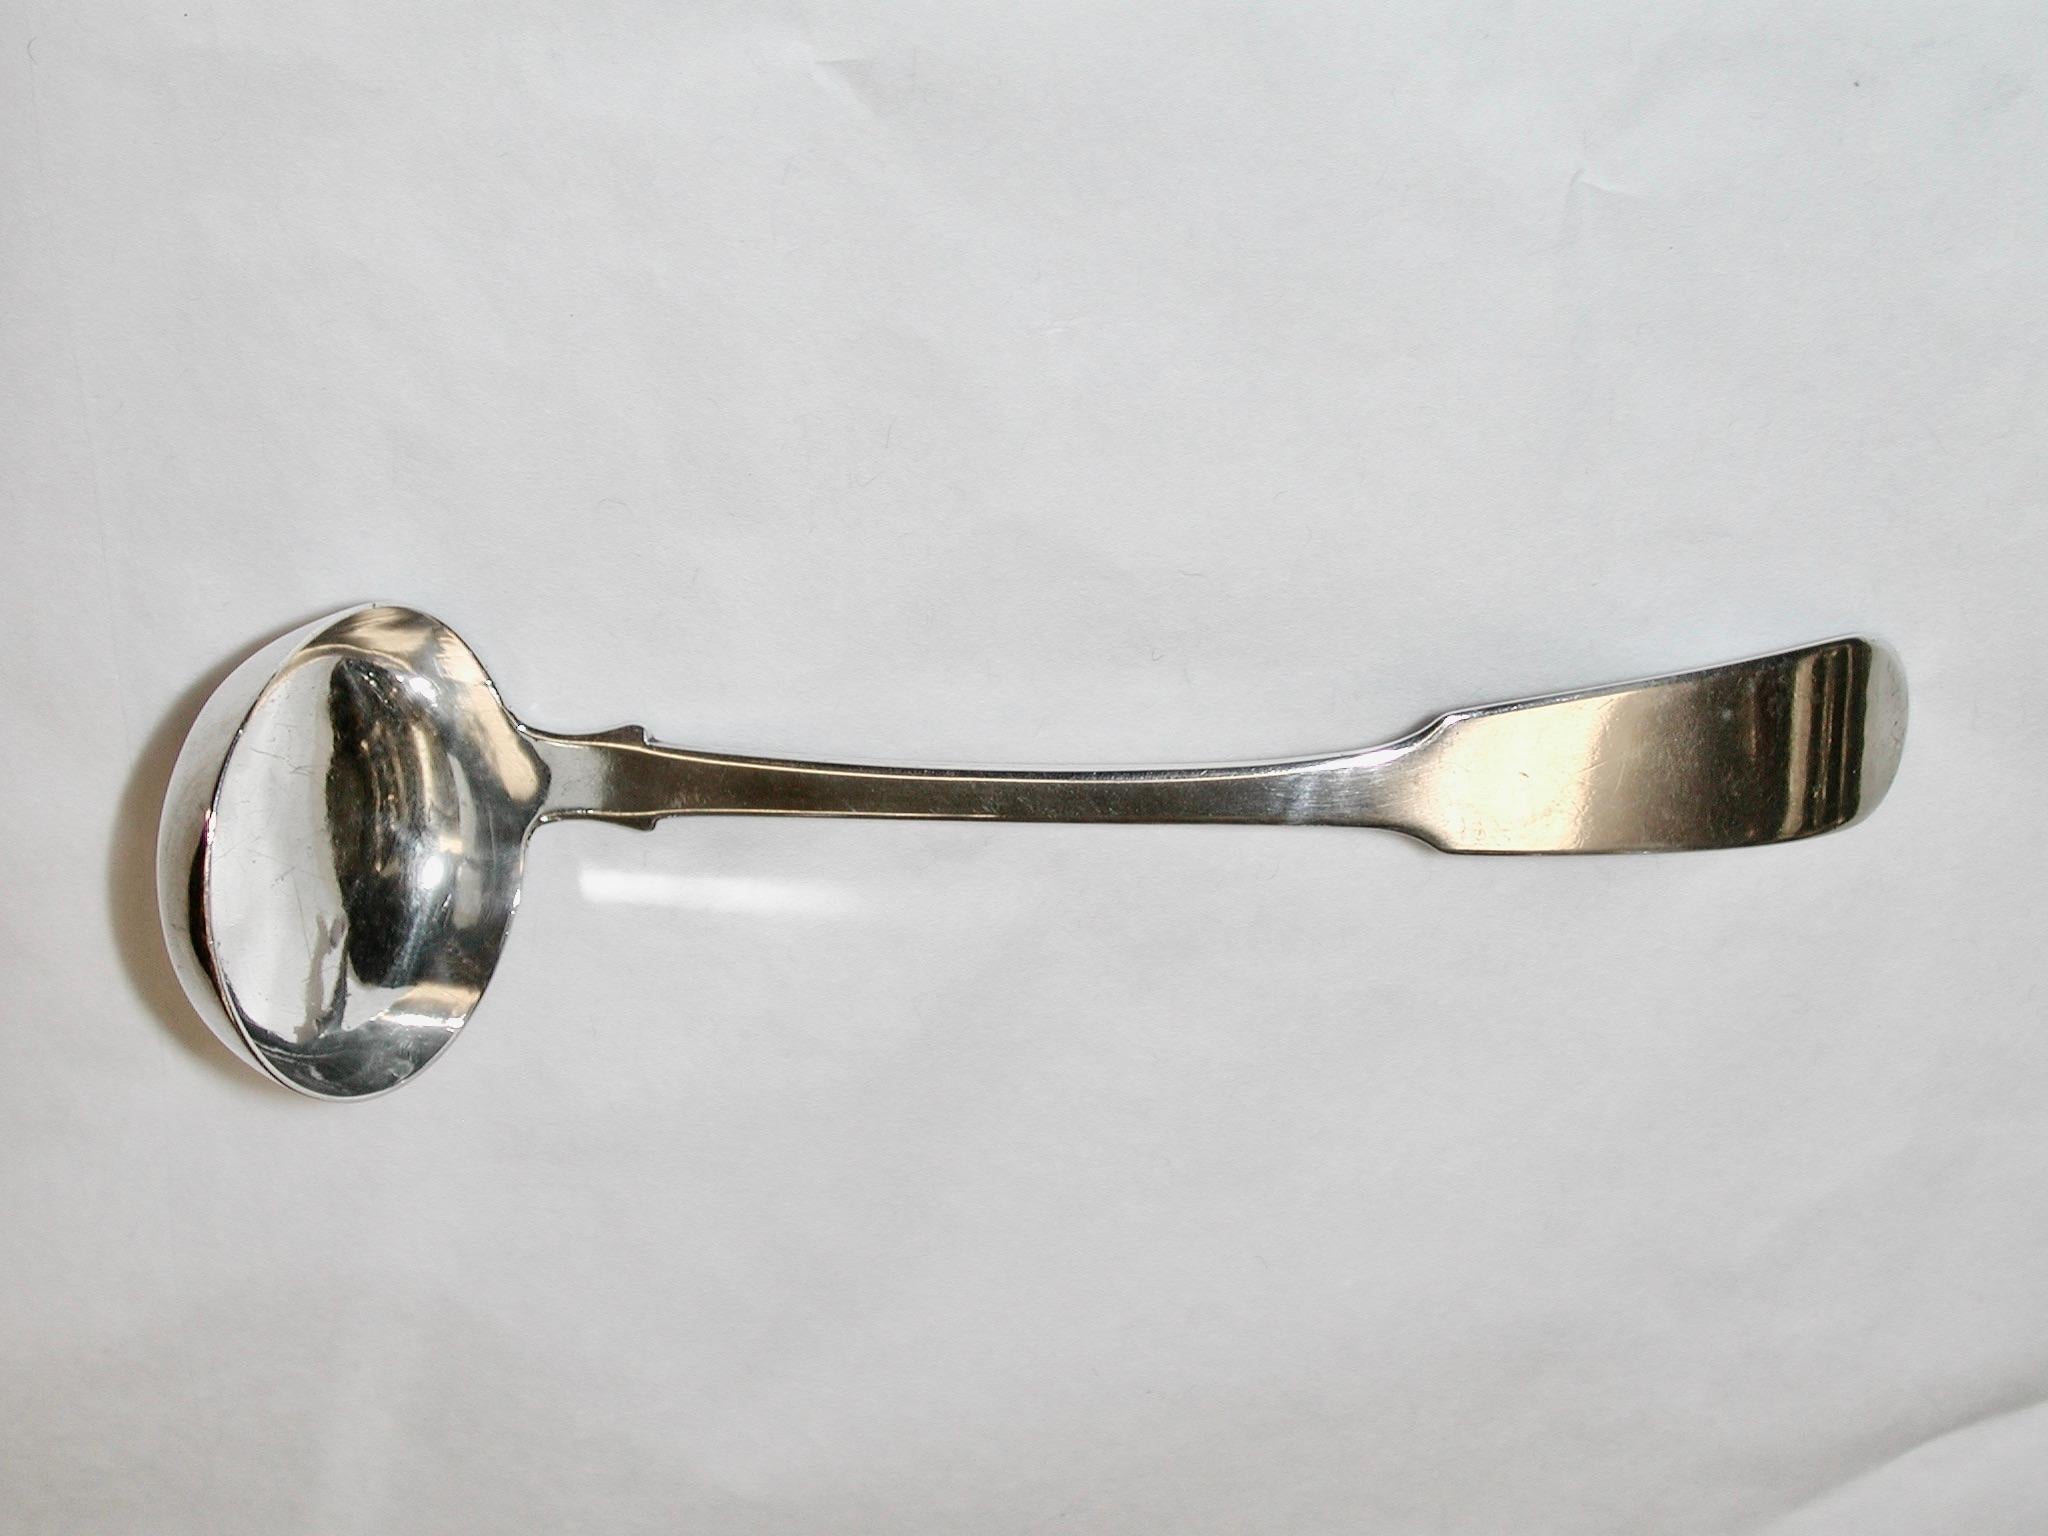 Antique George 1V Provincial Silver Toddy Ladle Rettie & Son Aberdeen Circa 1820
This ladle was used to serve Hot Toddy( Hot water, whiskey,lemon, honey and spices) into the drinking cup.
Typical elongated fiddle handle with a shallow bowl.